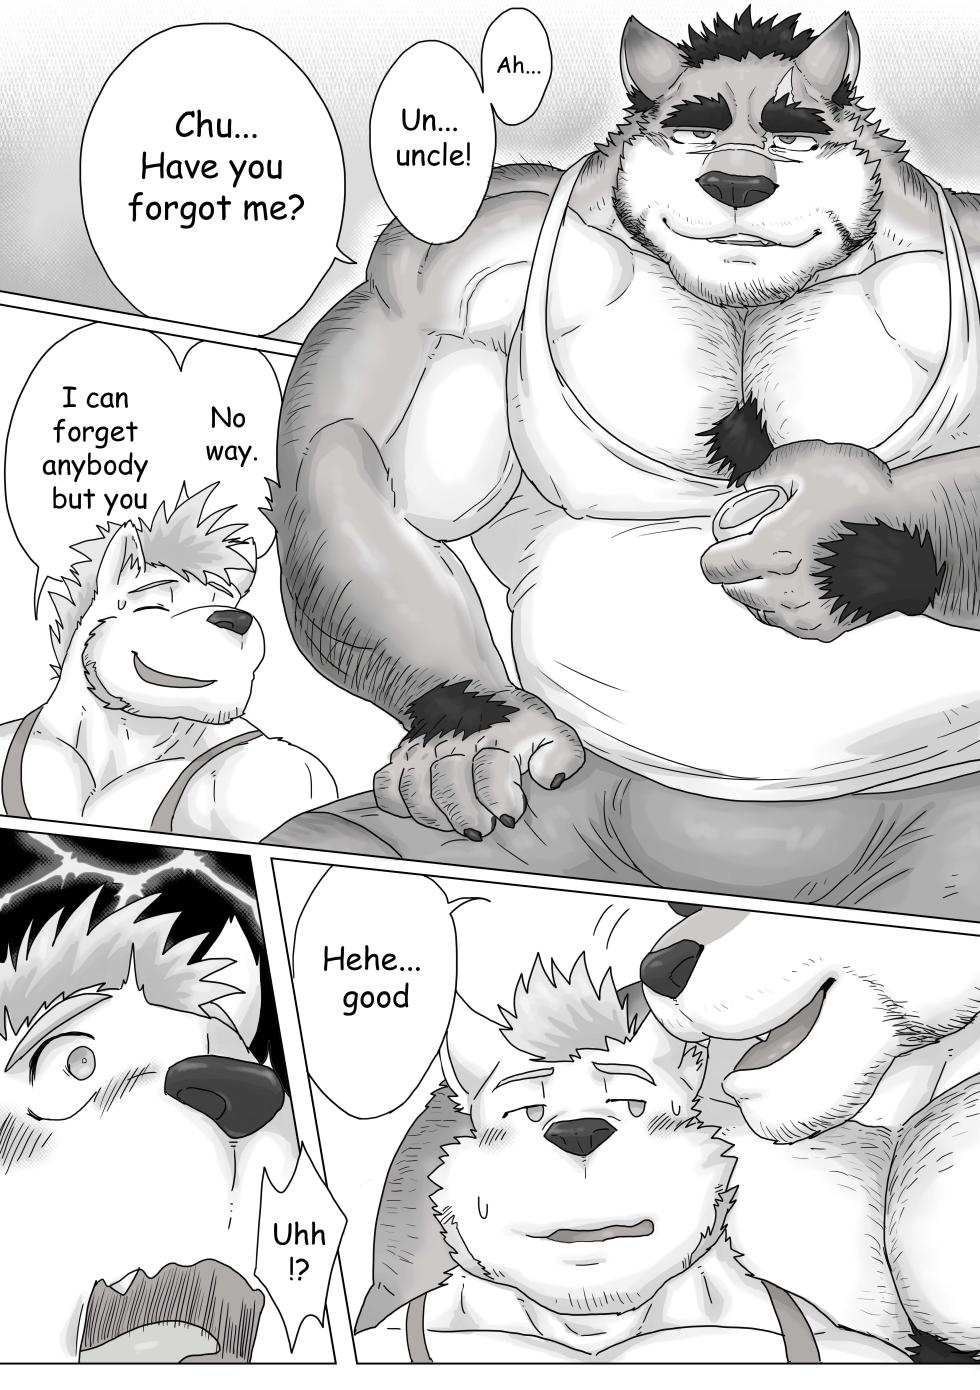 [Renoky] My hometown‘s uncle is a Horny Hung!! [English] [Decensored] [Digital] - Page 3